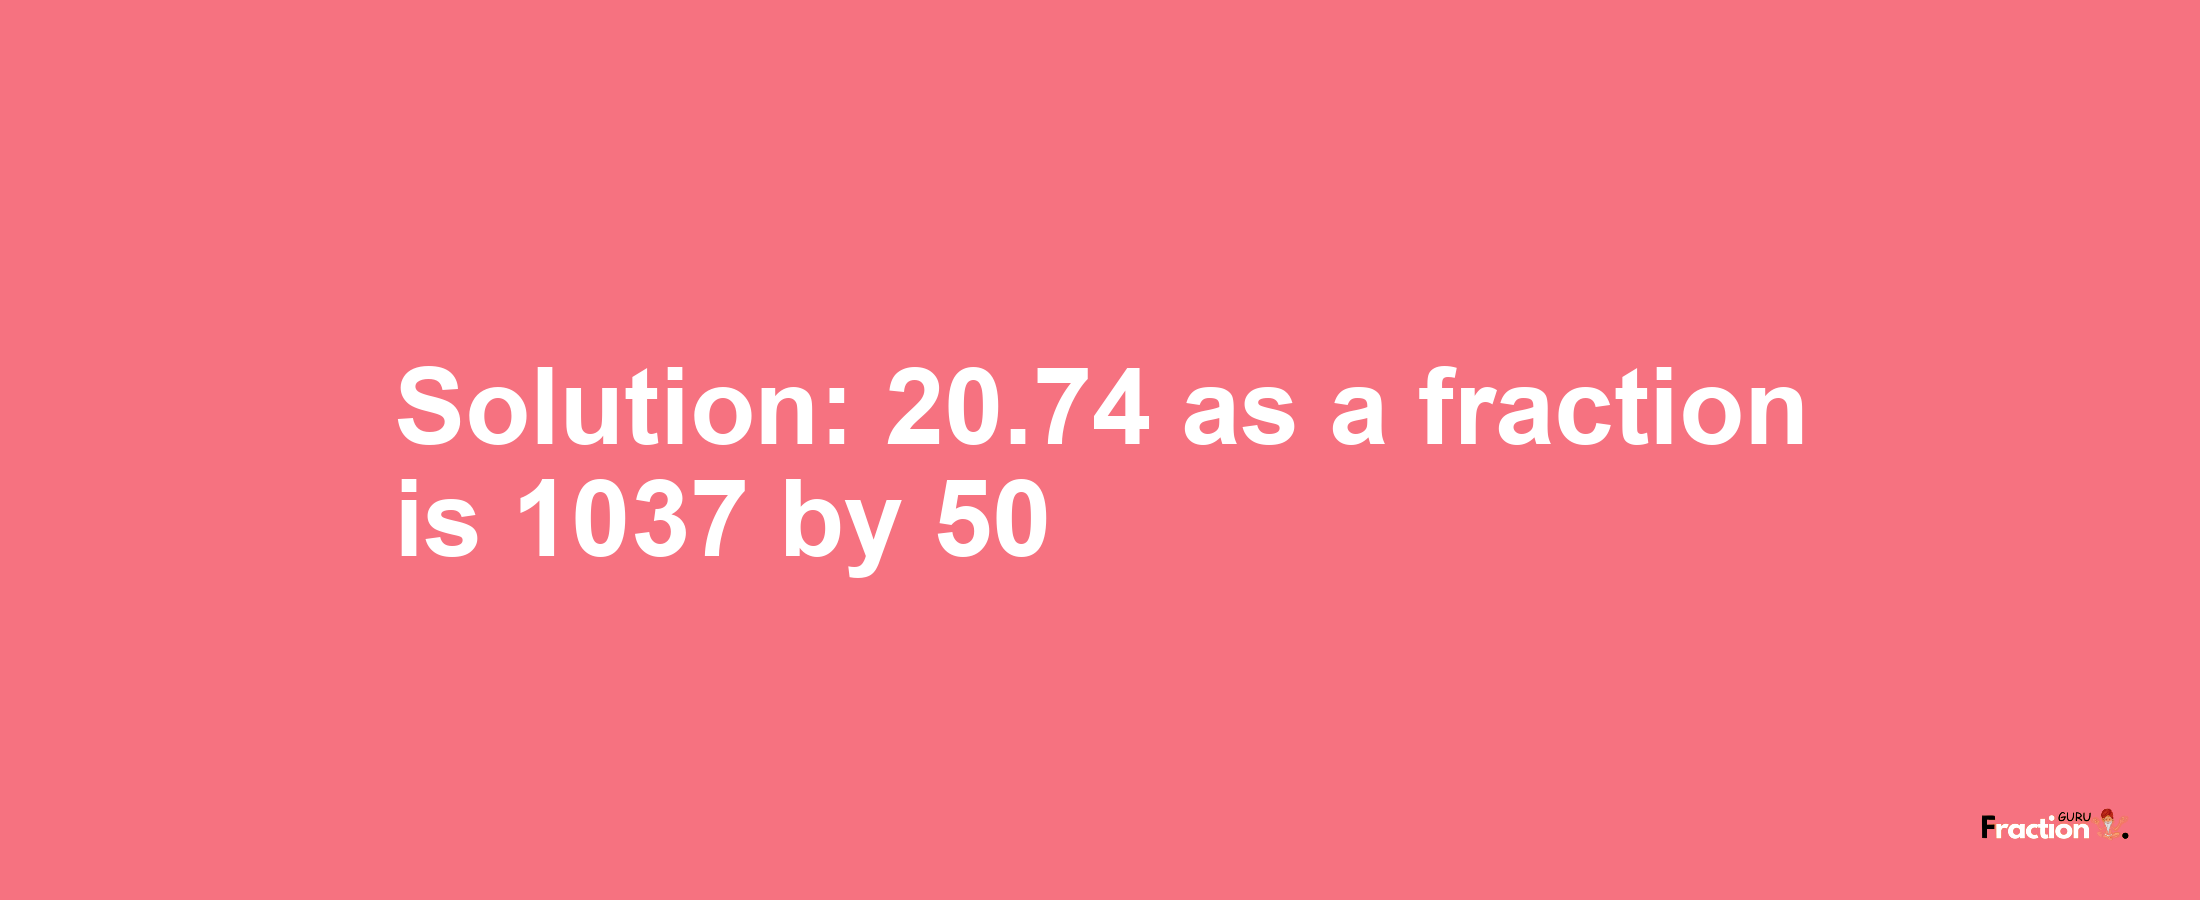 Solution:20.74 as a fraction is 1037/50